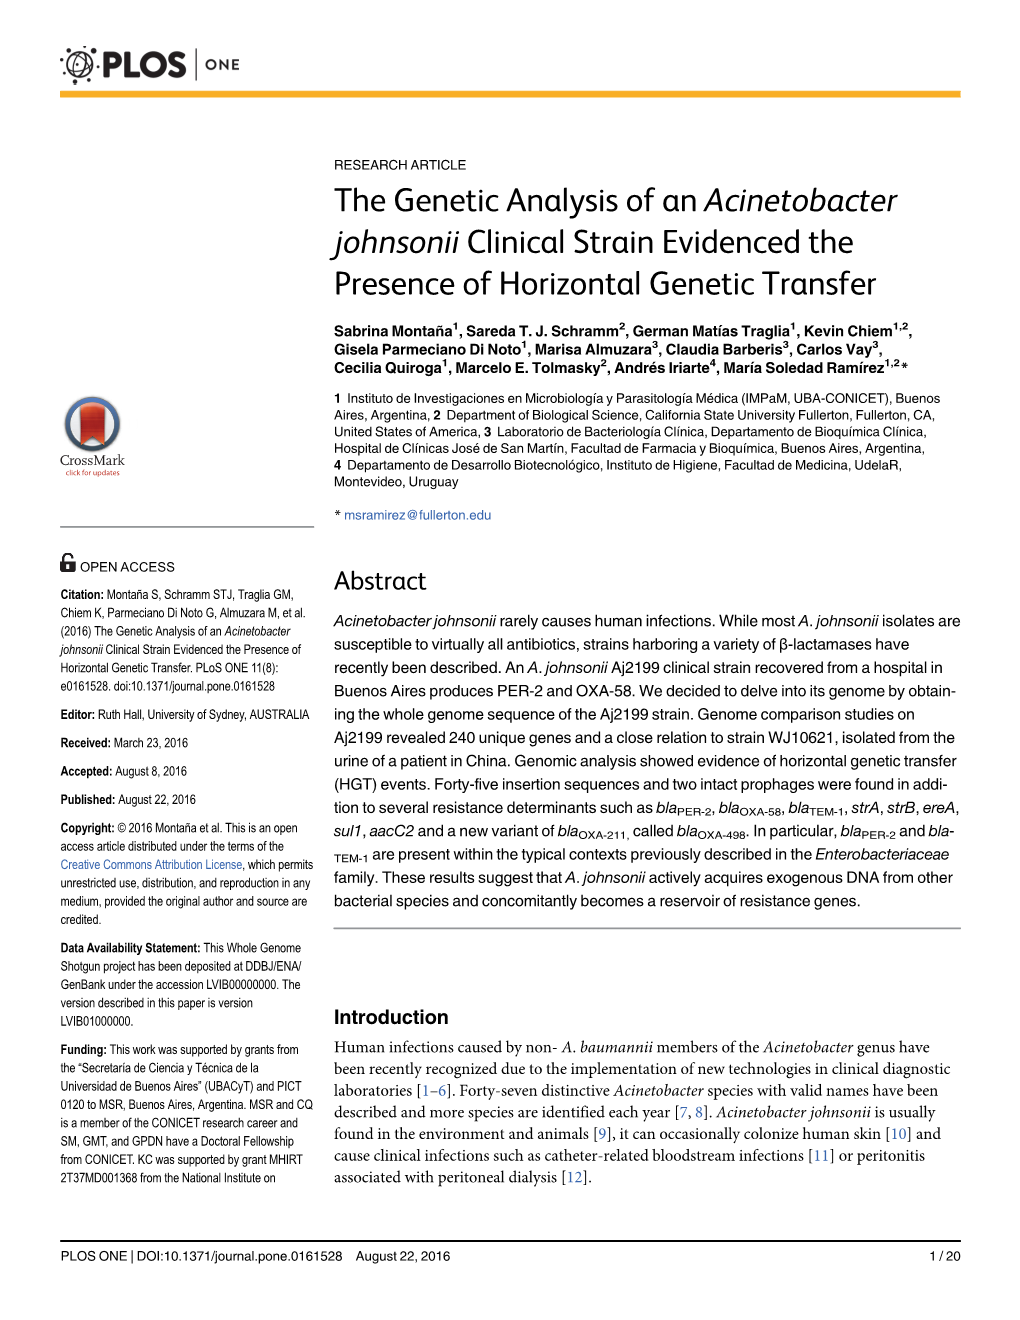 The Genetic Analysis of an Acinetobacter Johnsonii Clinical Strain Evidenced the Presence of Horizontal Genetic Transfer